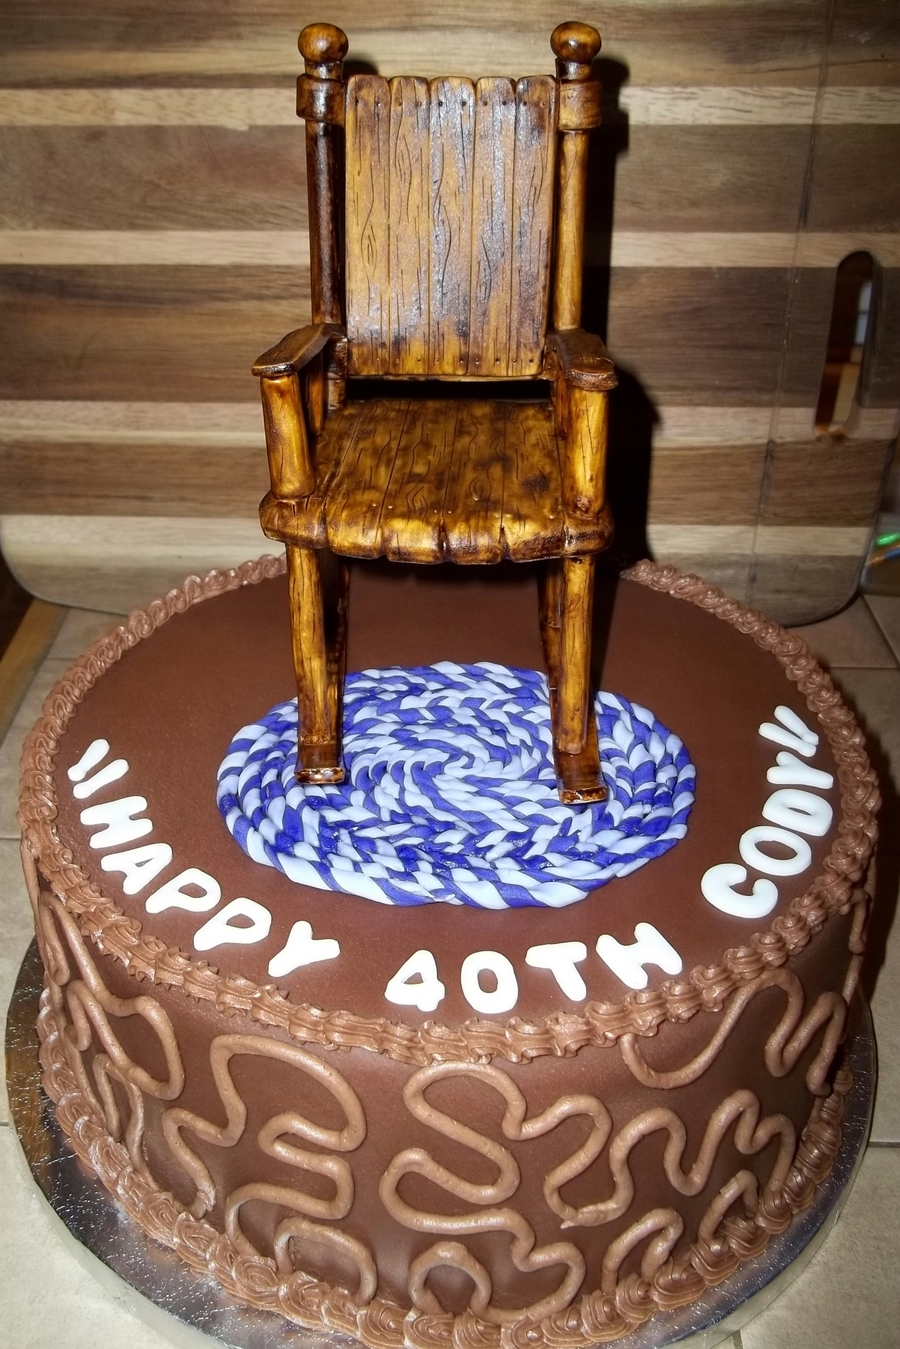 900_767666kypk_over-the-hill-40th-birthday-cake-with-rocking-chair.jpg